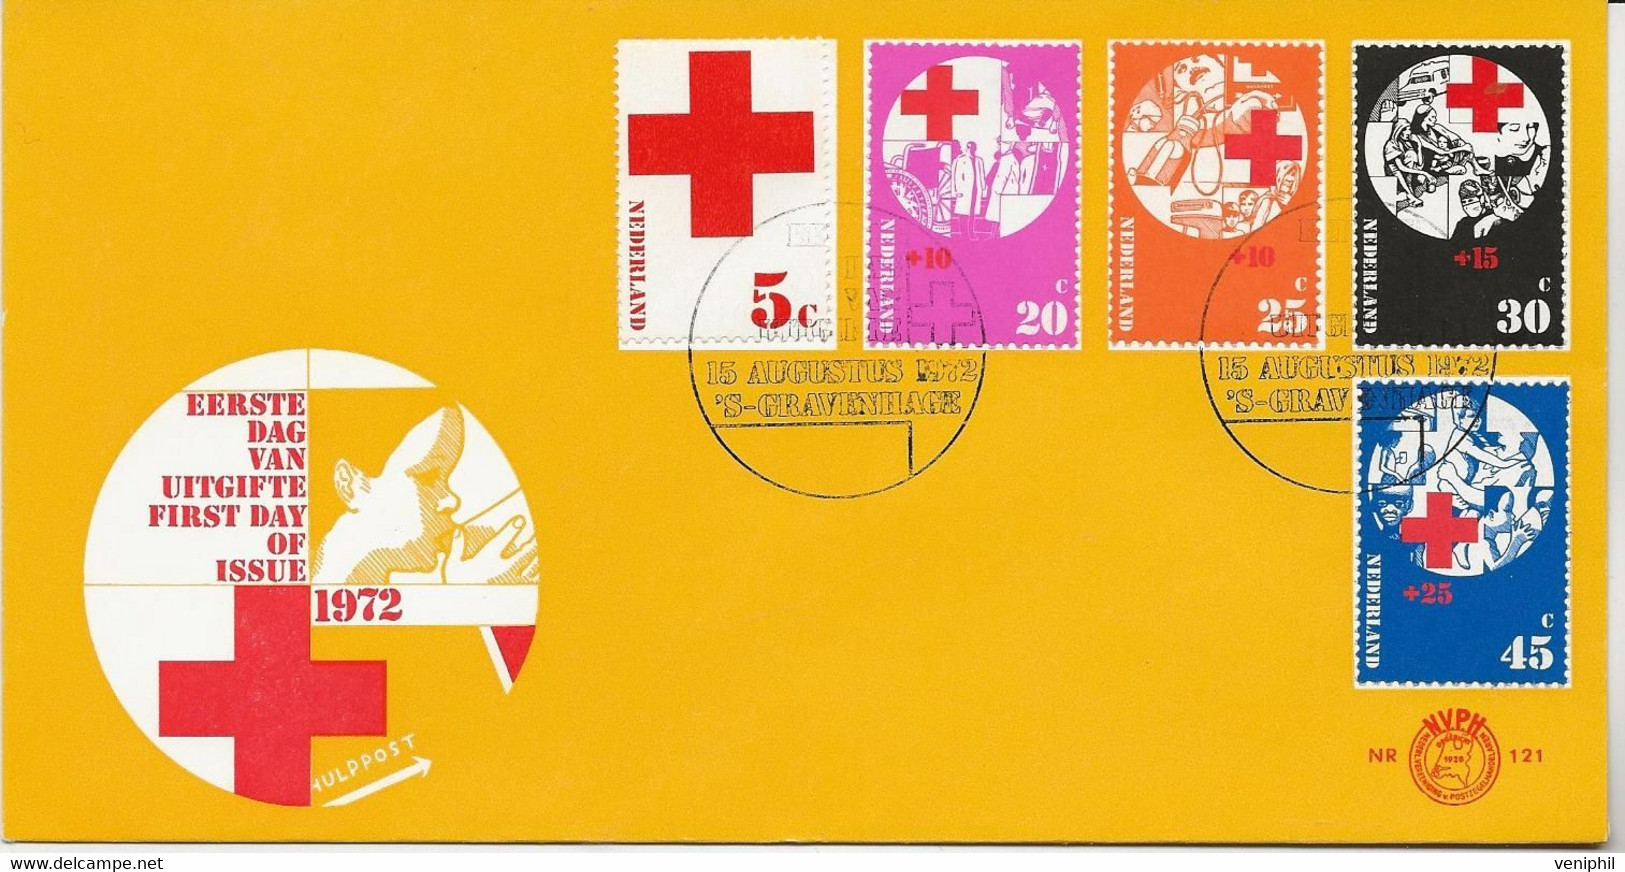 PAYS-BAS -LETTRE FDC AFFRANCHIE SERIE CROIX ROUGE N° 966 A 970 - ANNEE 1972  TTB - Red Cross